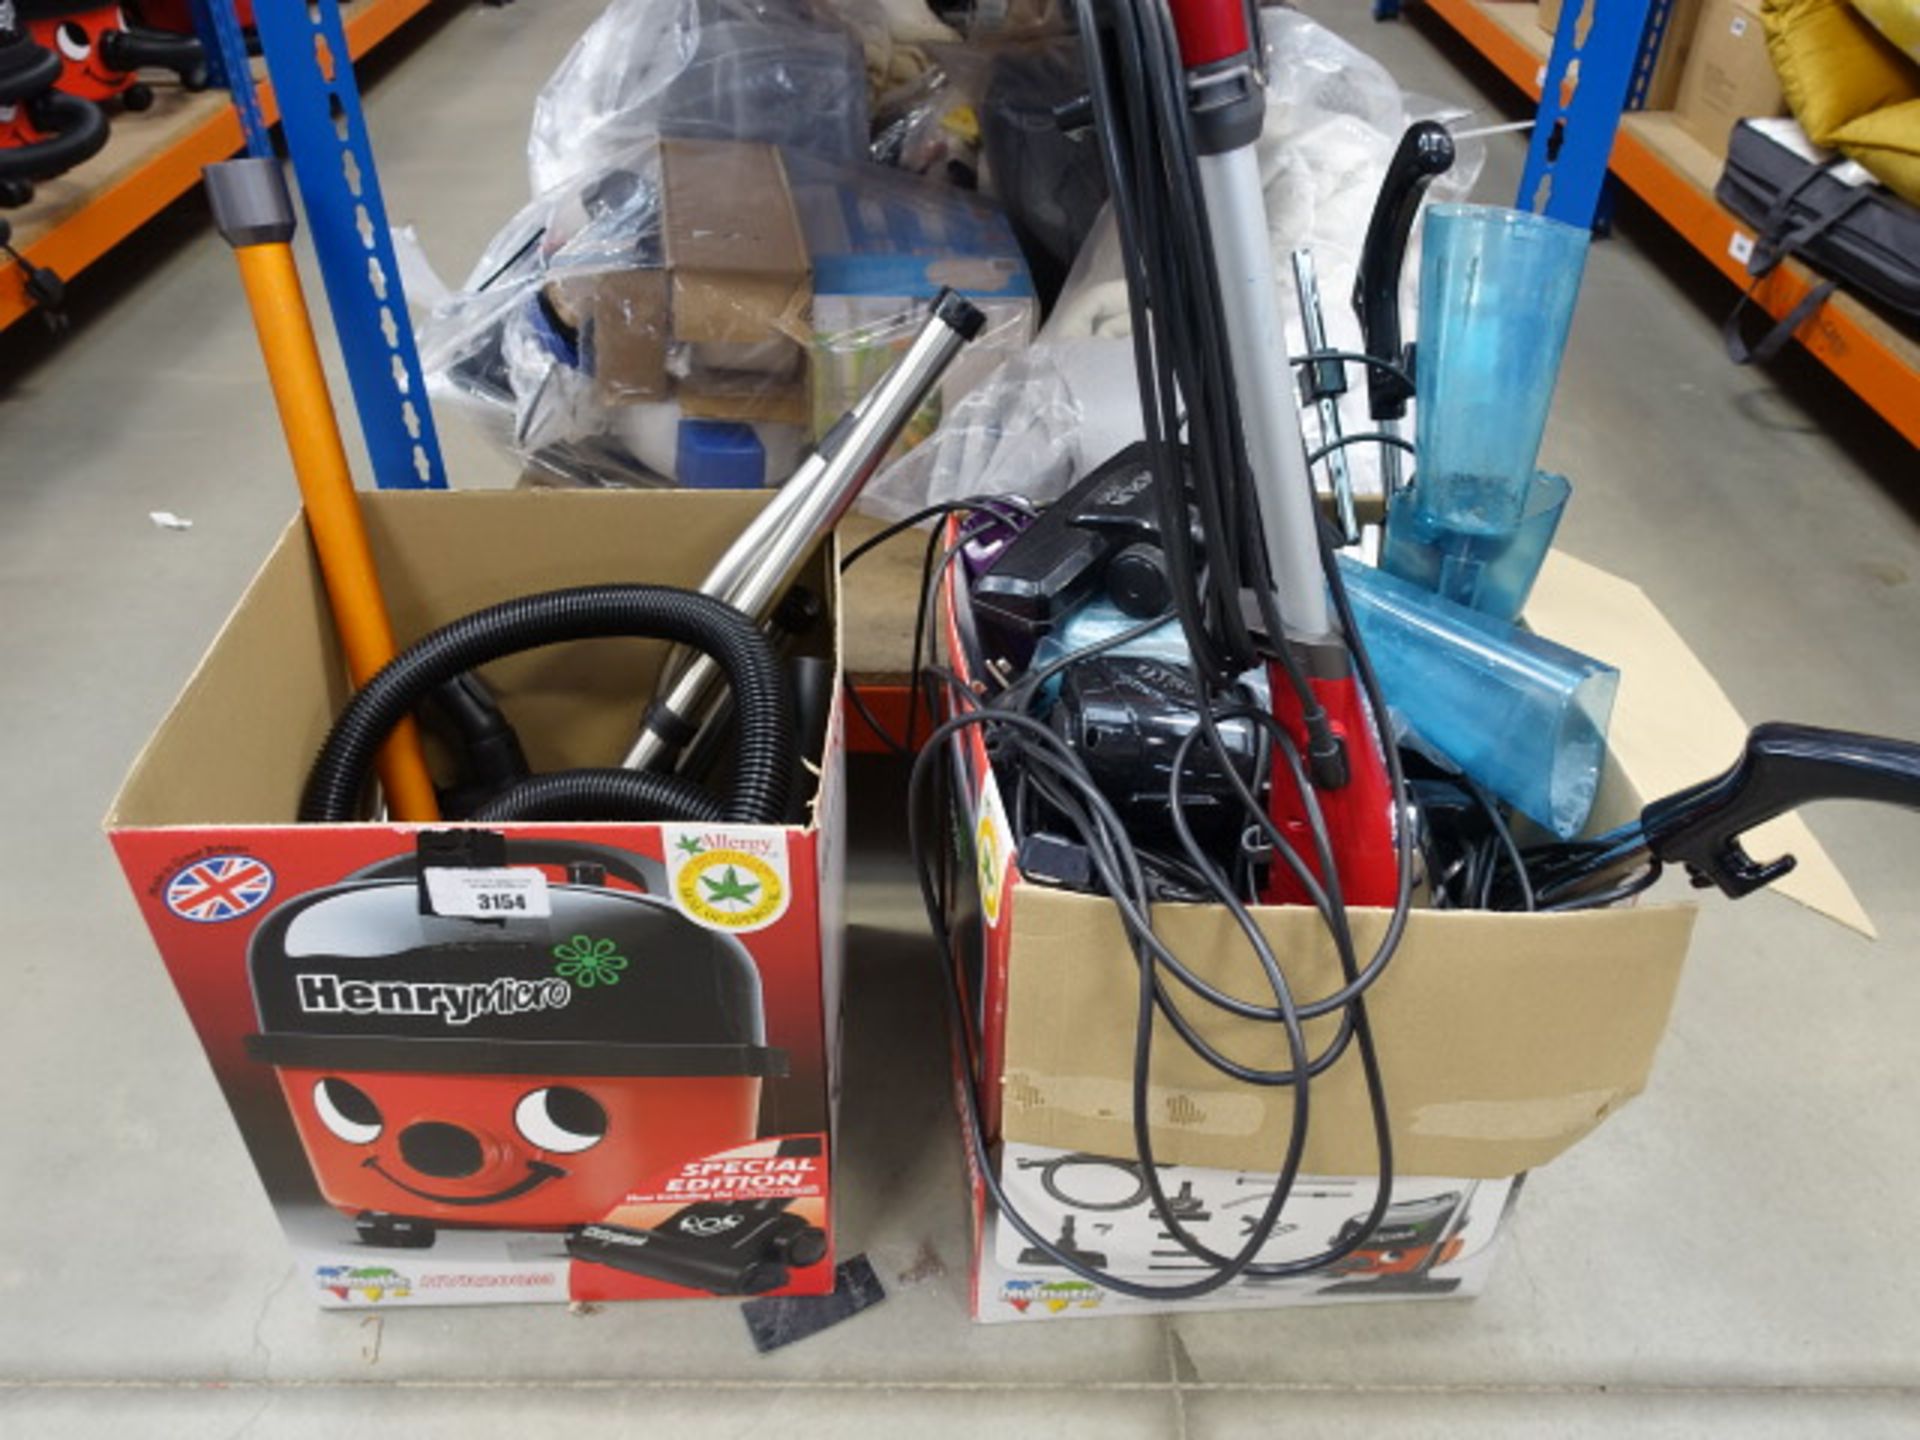 2 boxes containing Henry vacuum cleaner accessories, Sharp steam mop, mini vacuum cleaners, etc